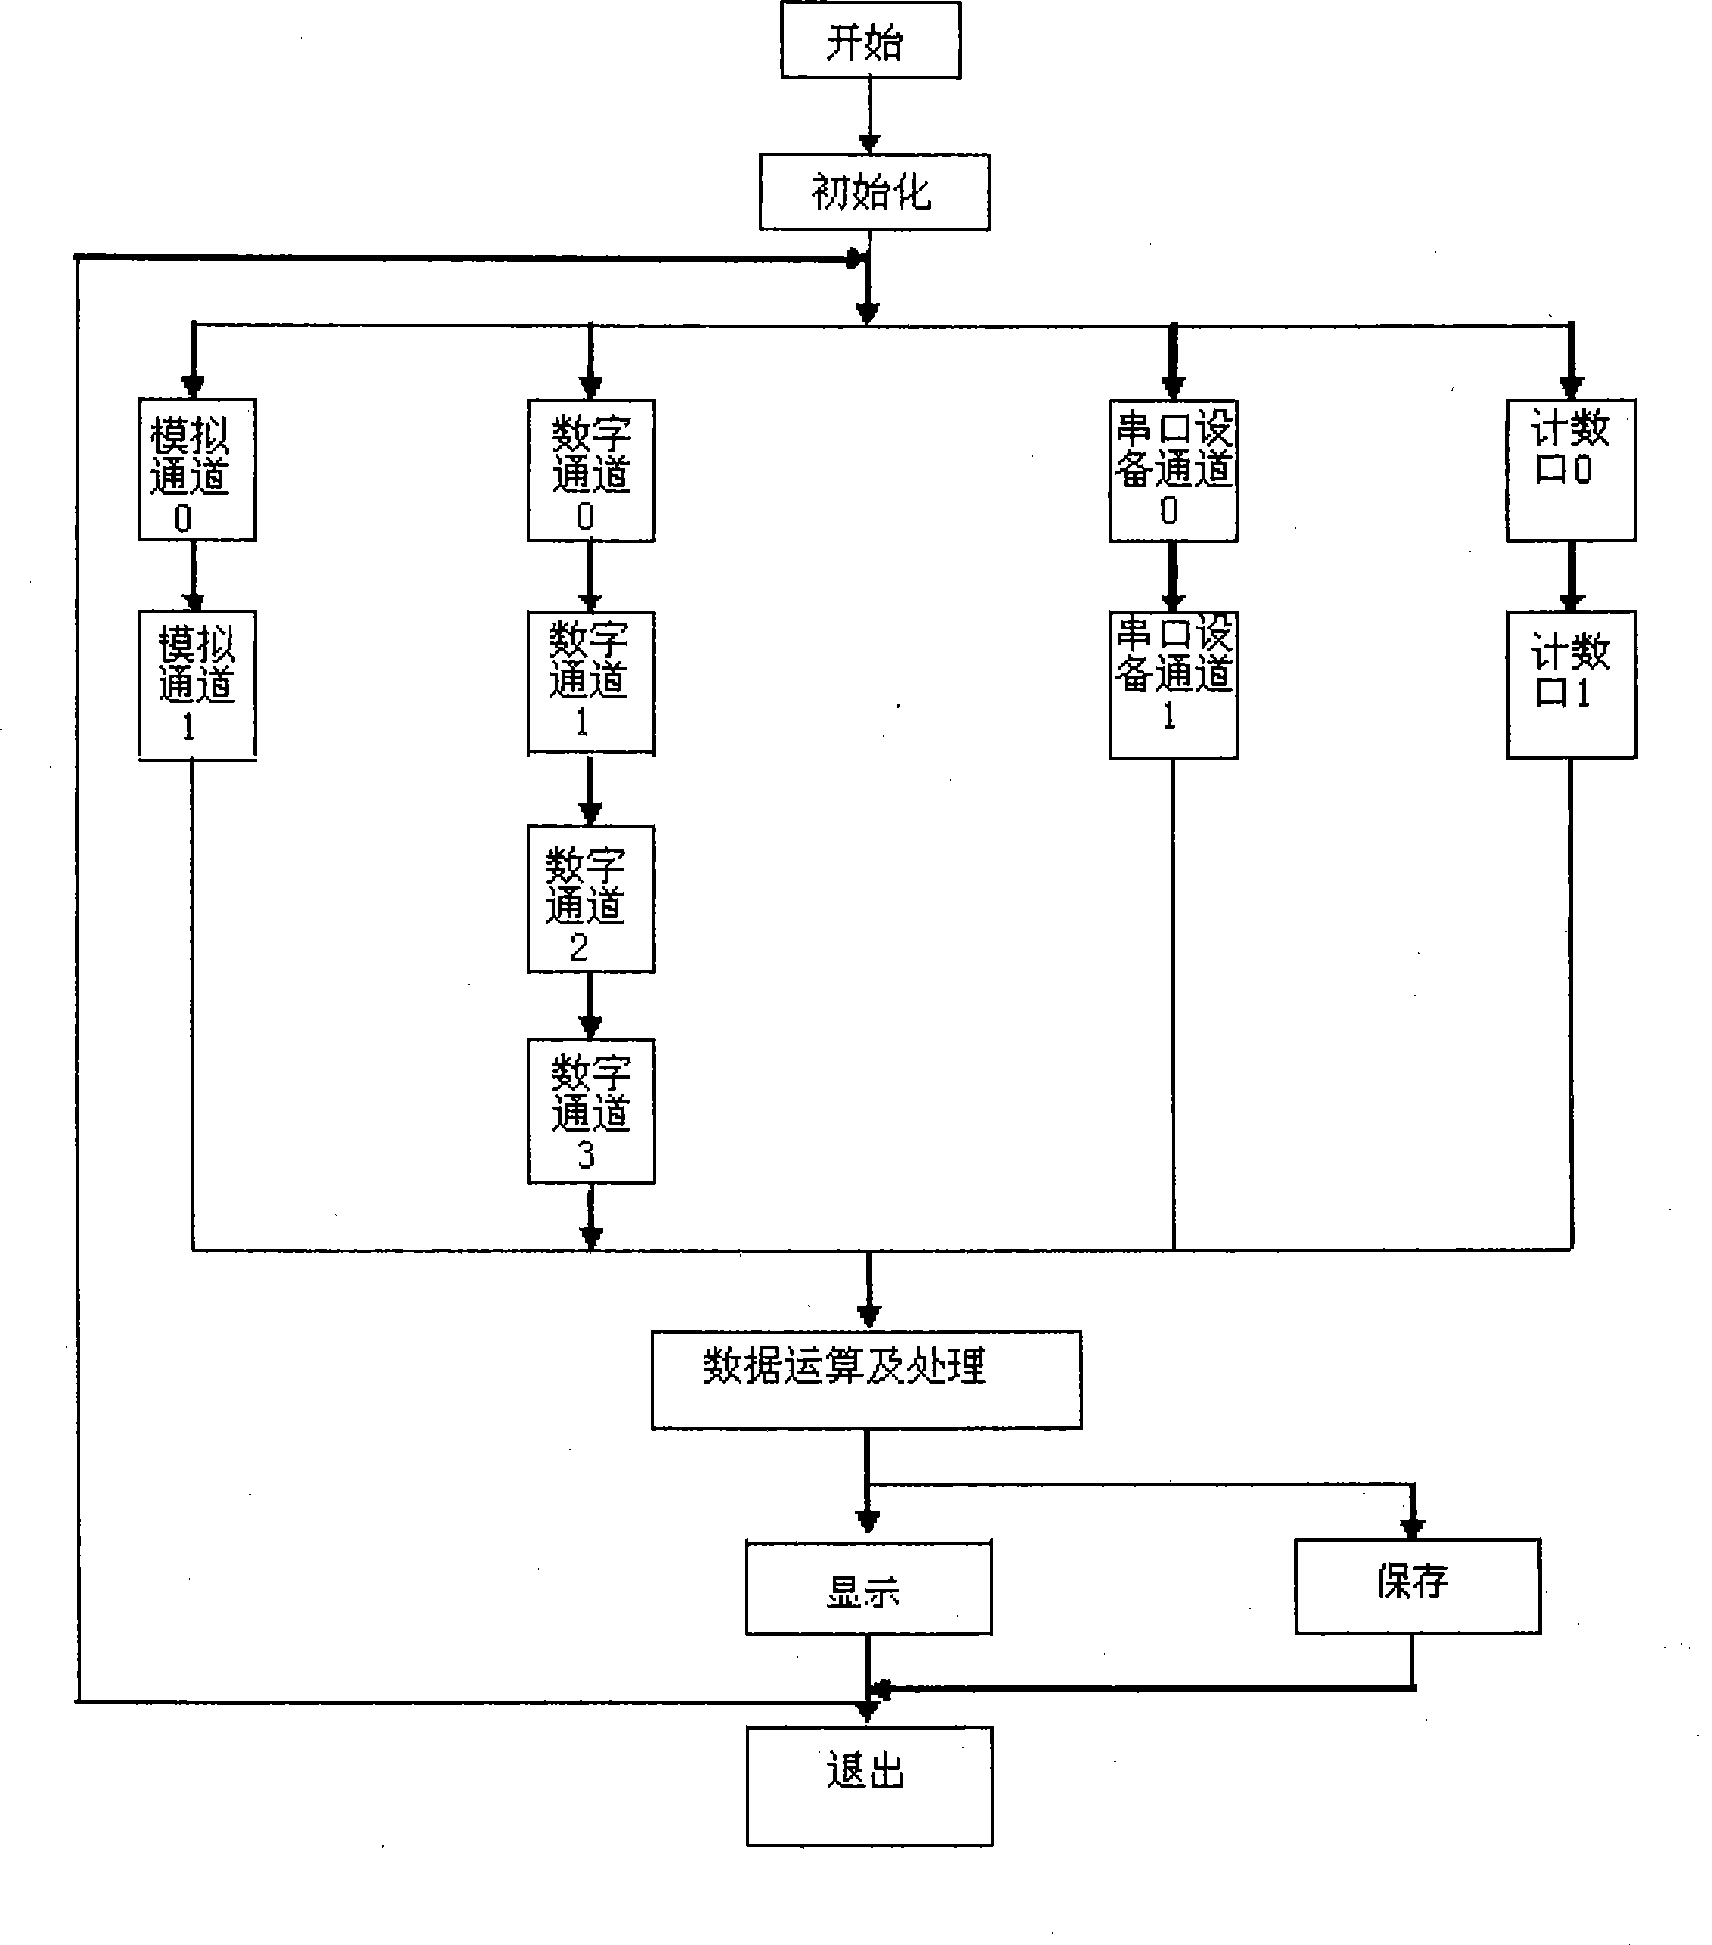 Data acquisition method for real time monitoring system